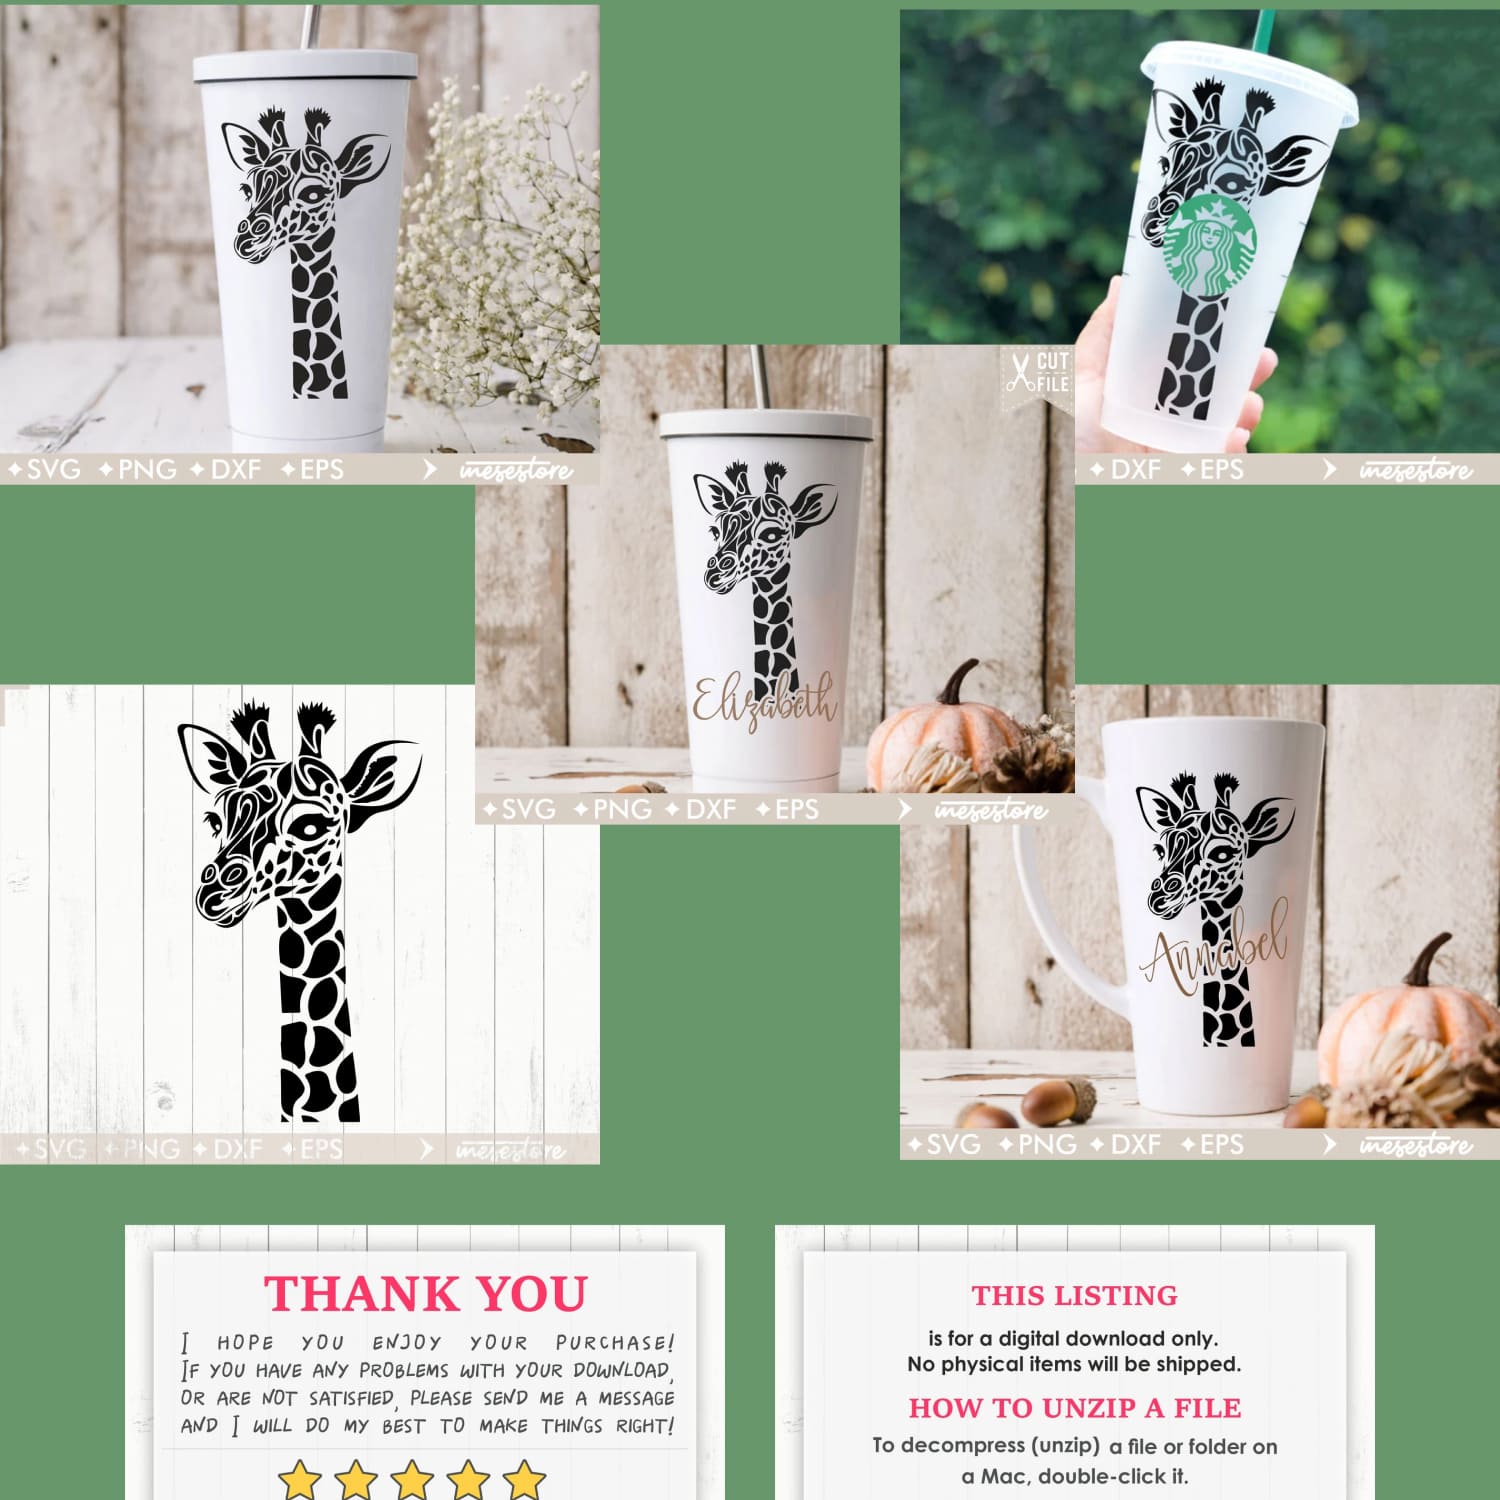 Collage of photos of a starbucks cup with a giraffe design.